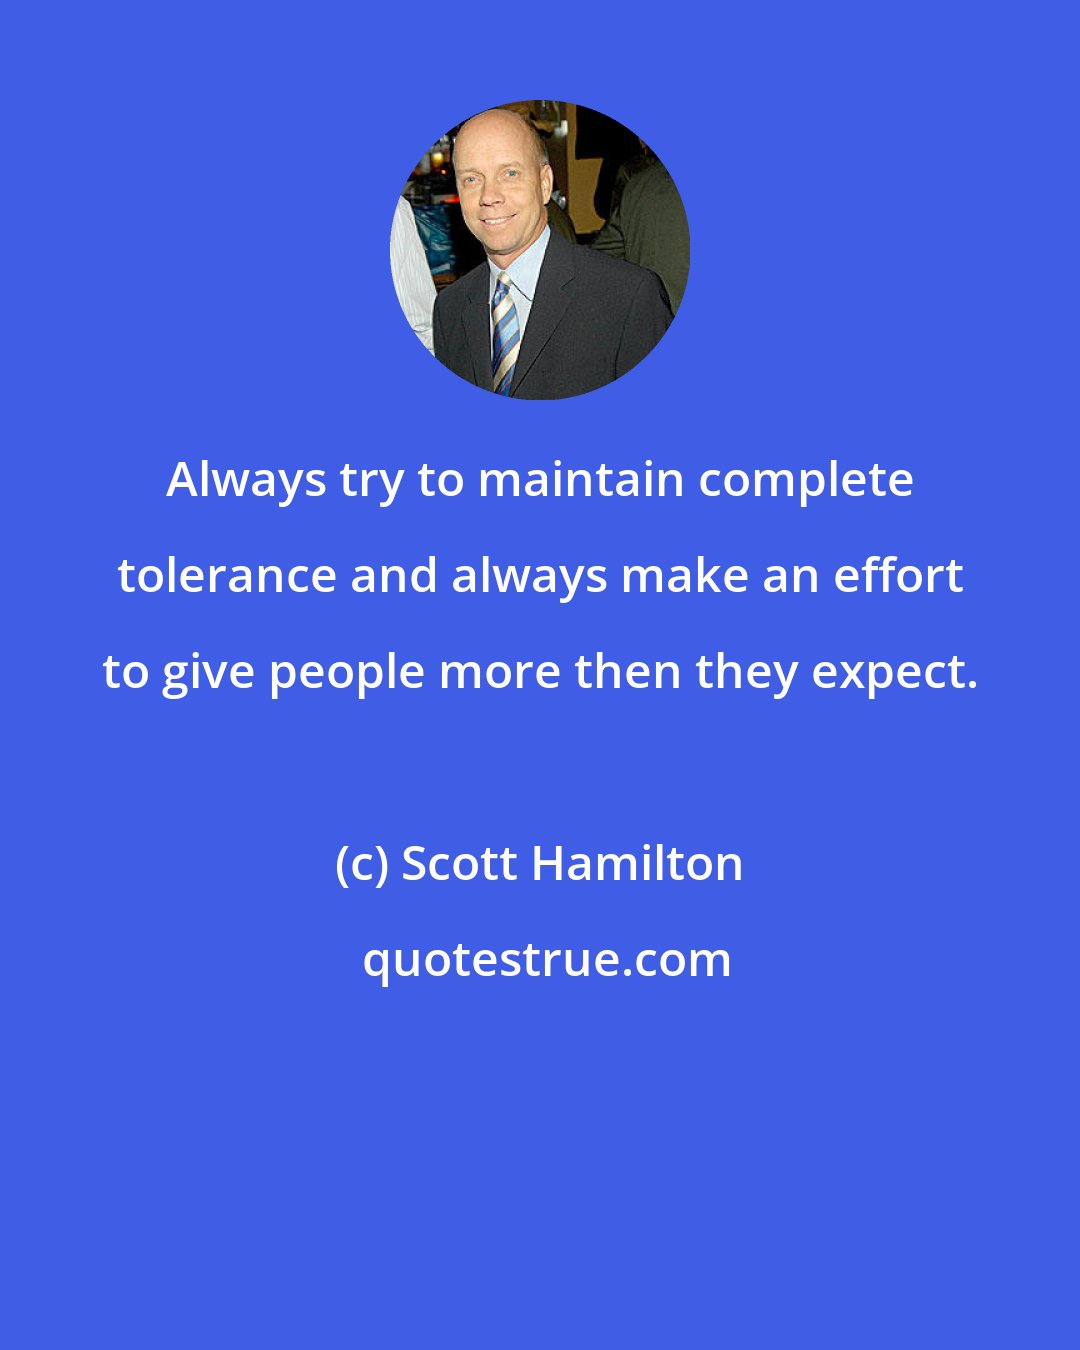 Scott Hamilton: Always try to maintain complete tolerance and always make an effort to give people more then they expect.